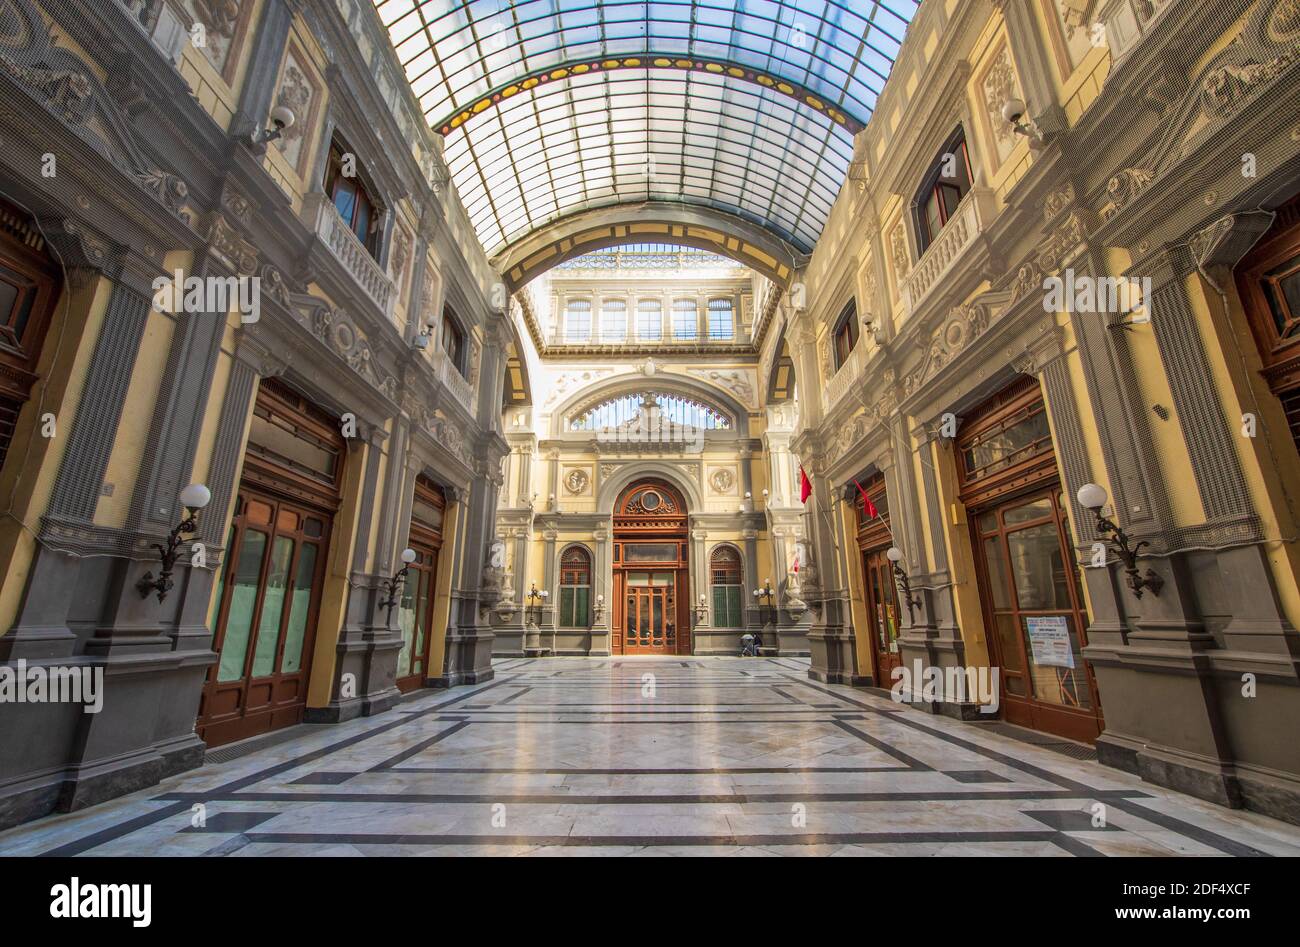 A public shopping gallery built in 1887, Galleria Principe di Napoli is part of the Unesco World Heritage Naples. Here in particular the interiors Stock Photo